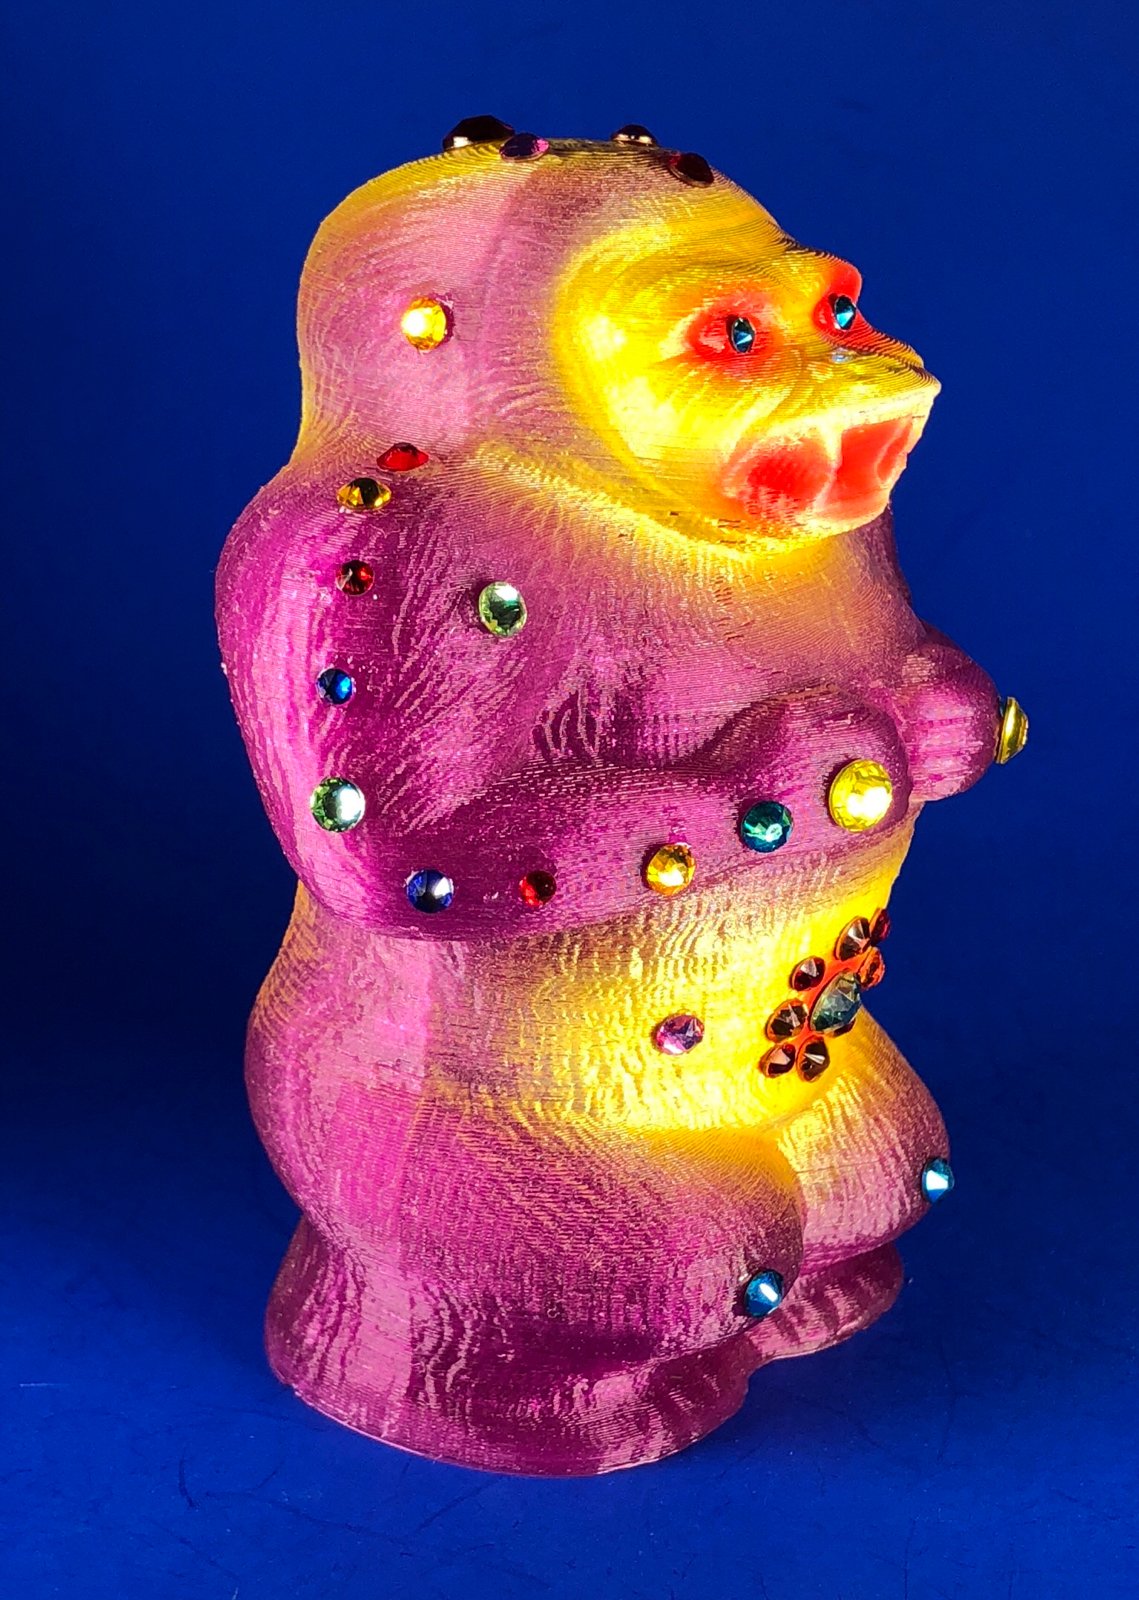 Super squat Ape with 44 rhinestones and a giant eyeball on his back